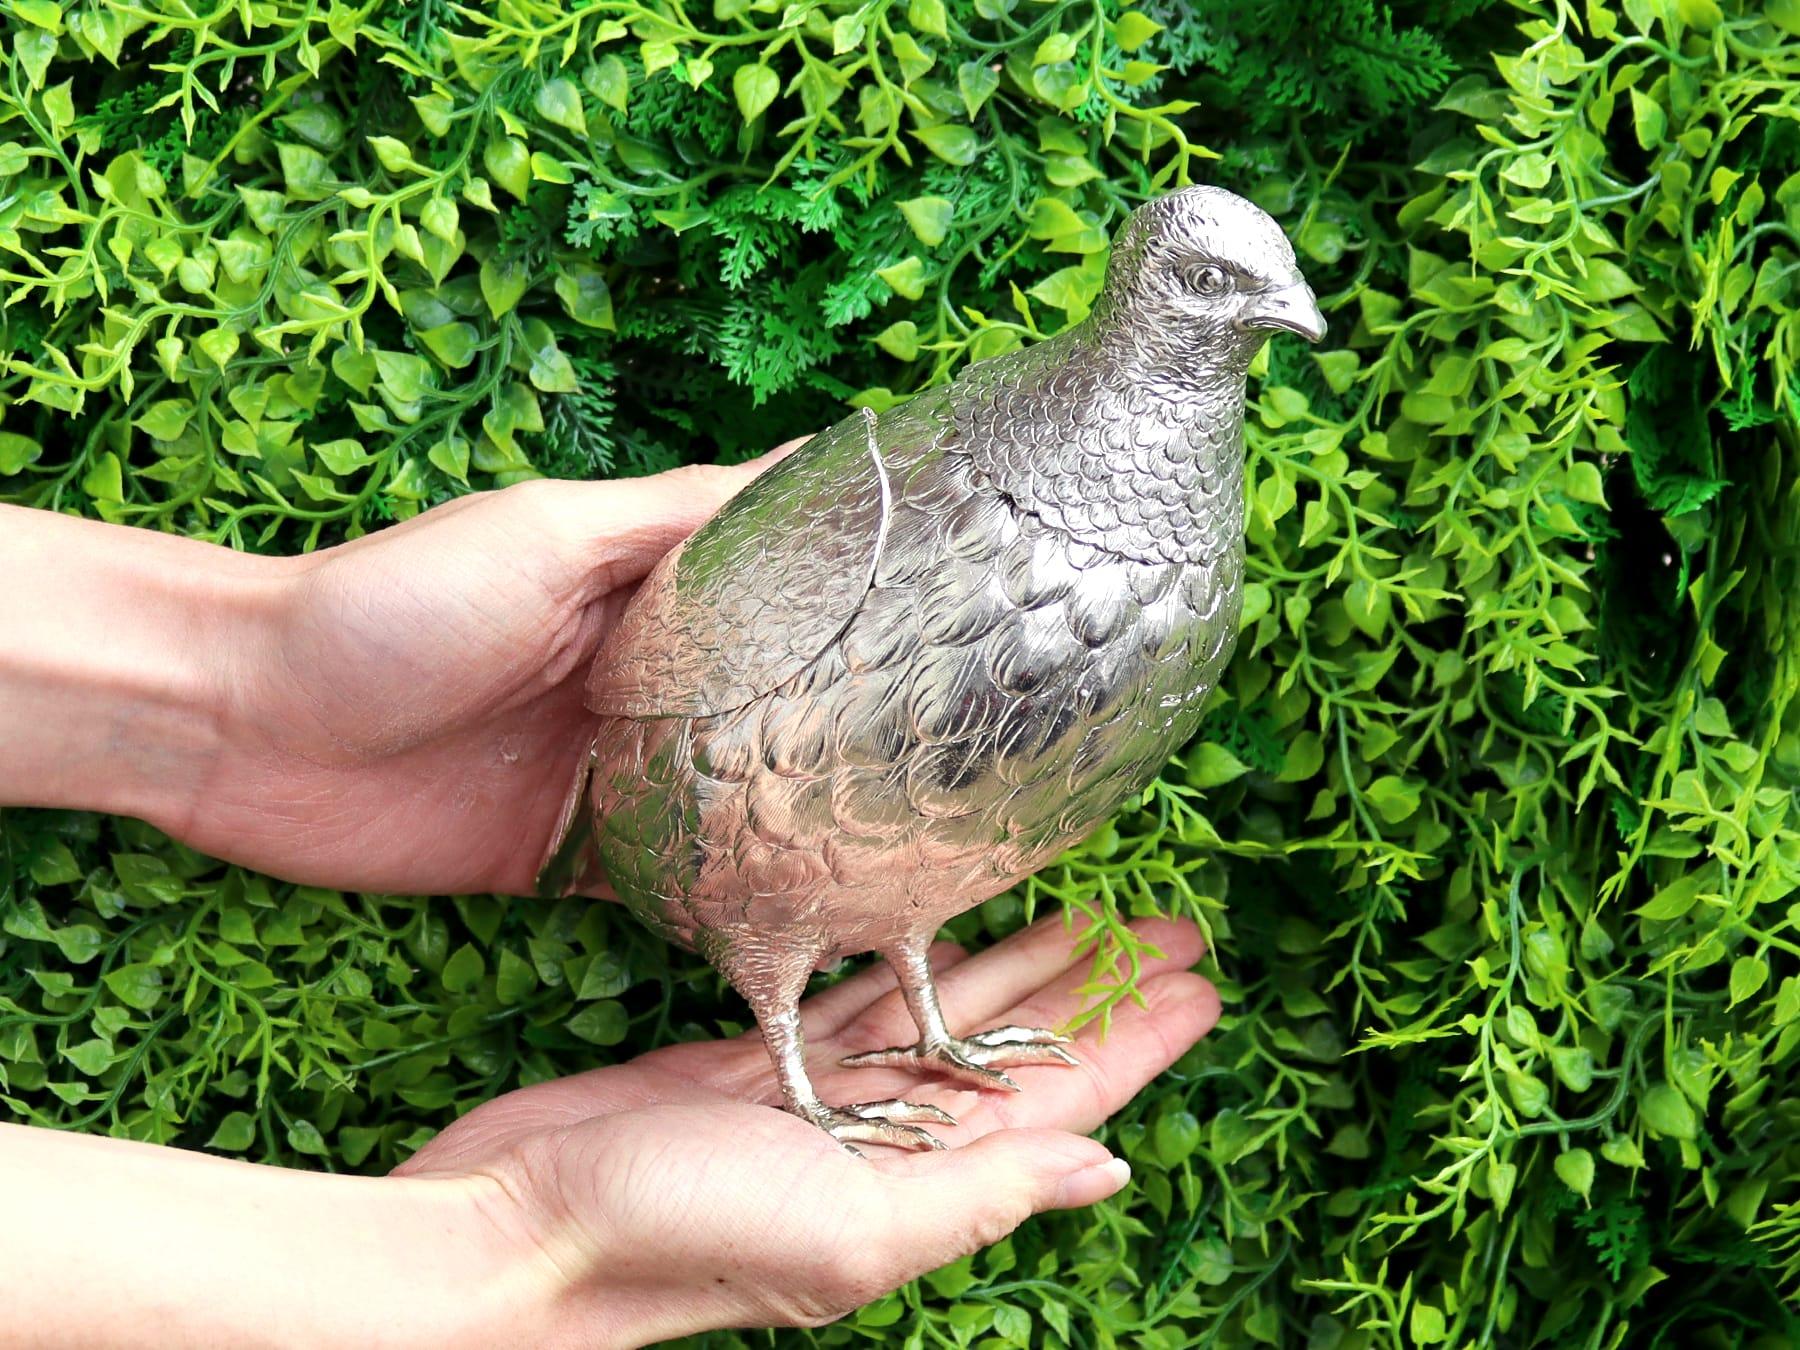 An exceptional, fine and impressive antique German sterling silver sugar box modelled in the form of a partridge; part of our collection of silver bird boxes

This exceptional, fine and impressive antique German cast sterling silver sugar box has